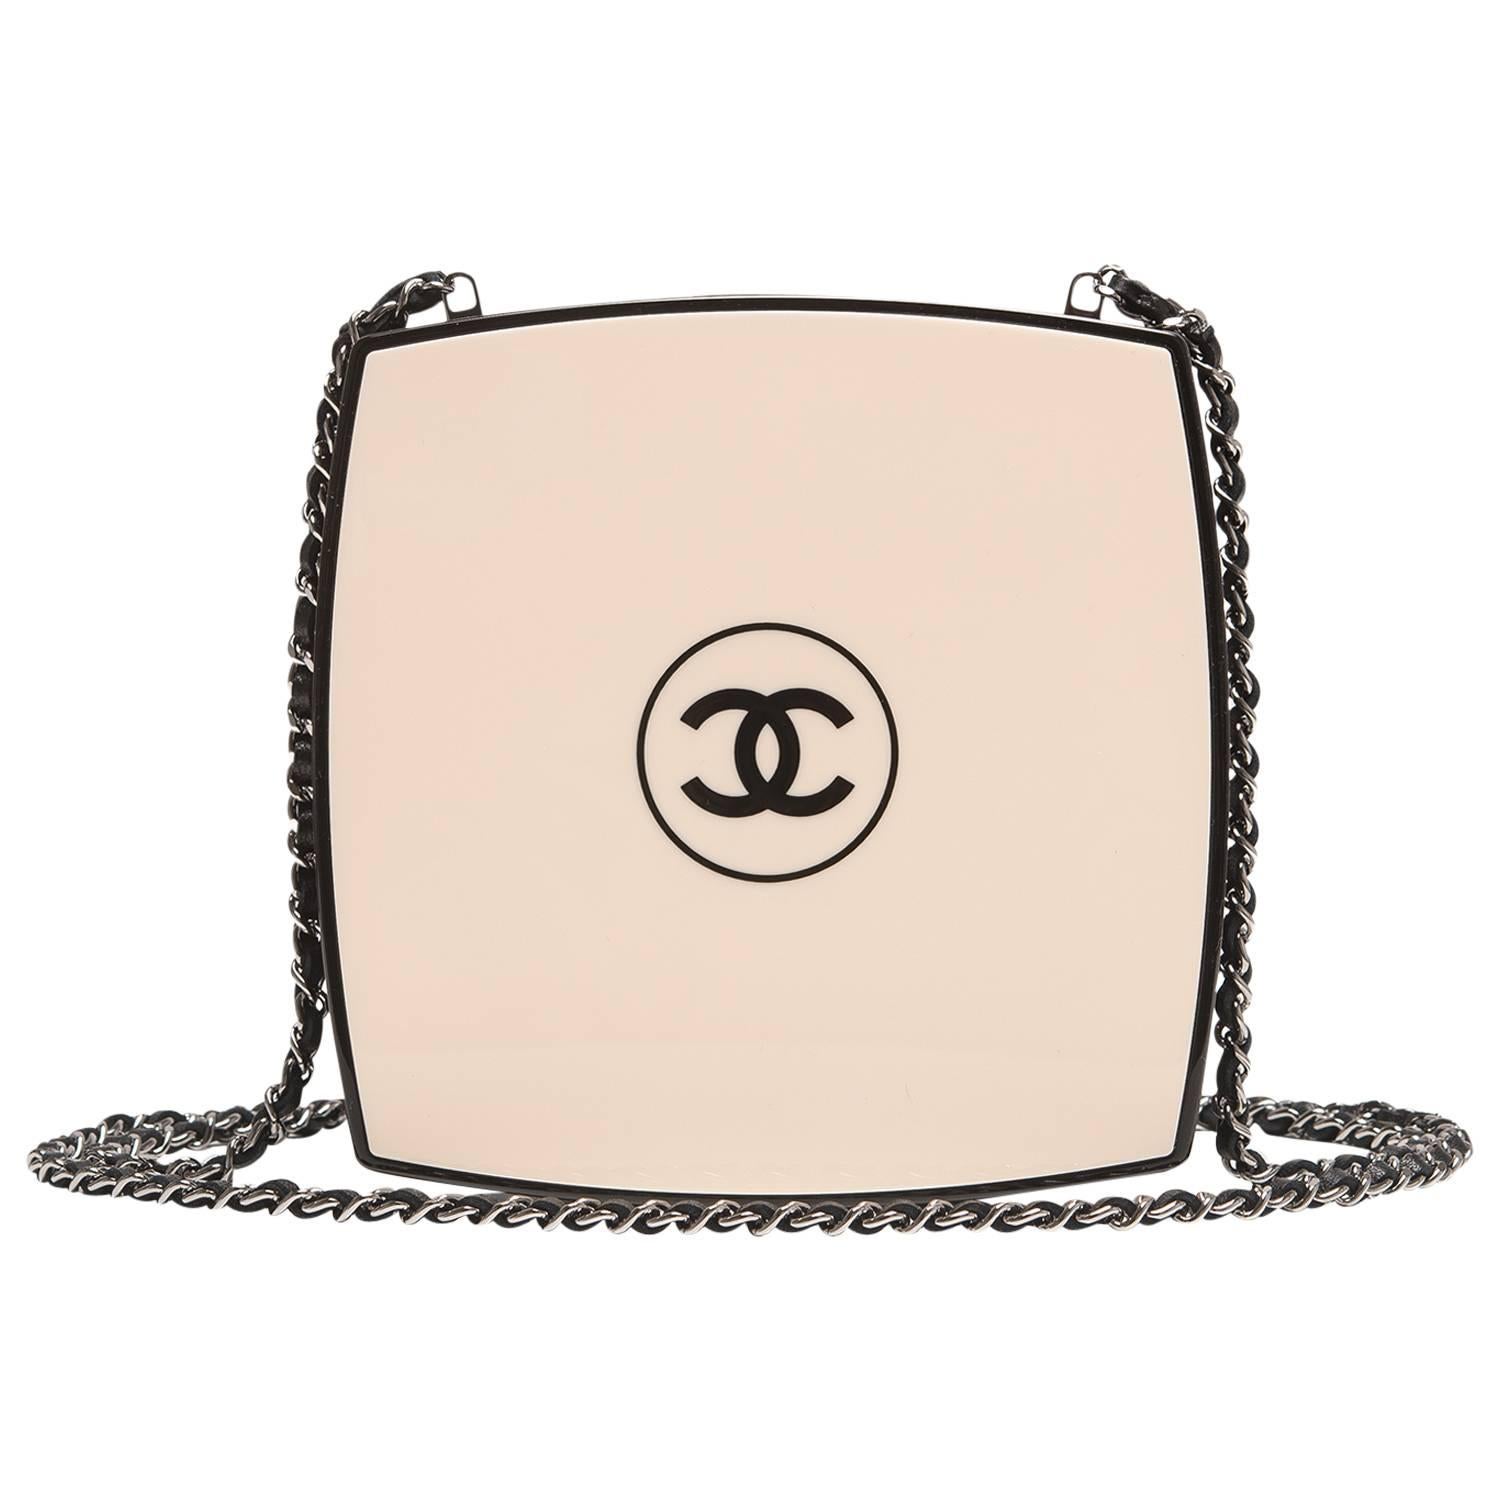 Chanel White Compact Powder Minaudiere NEW For Sale